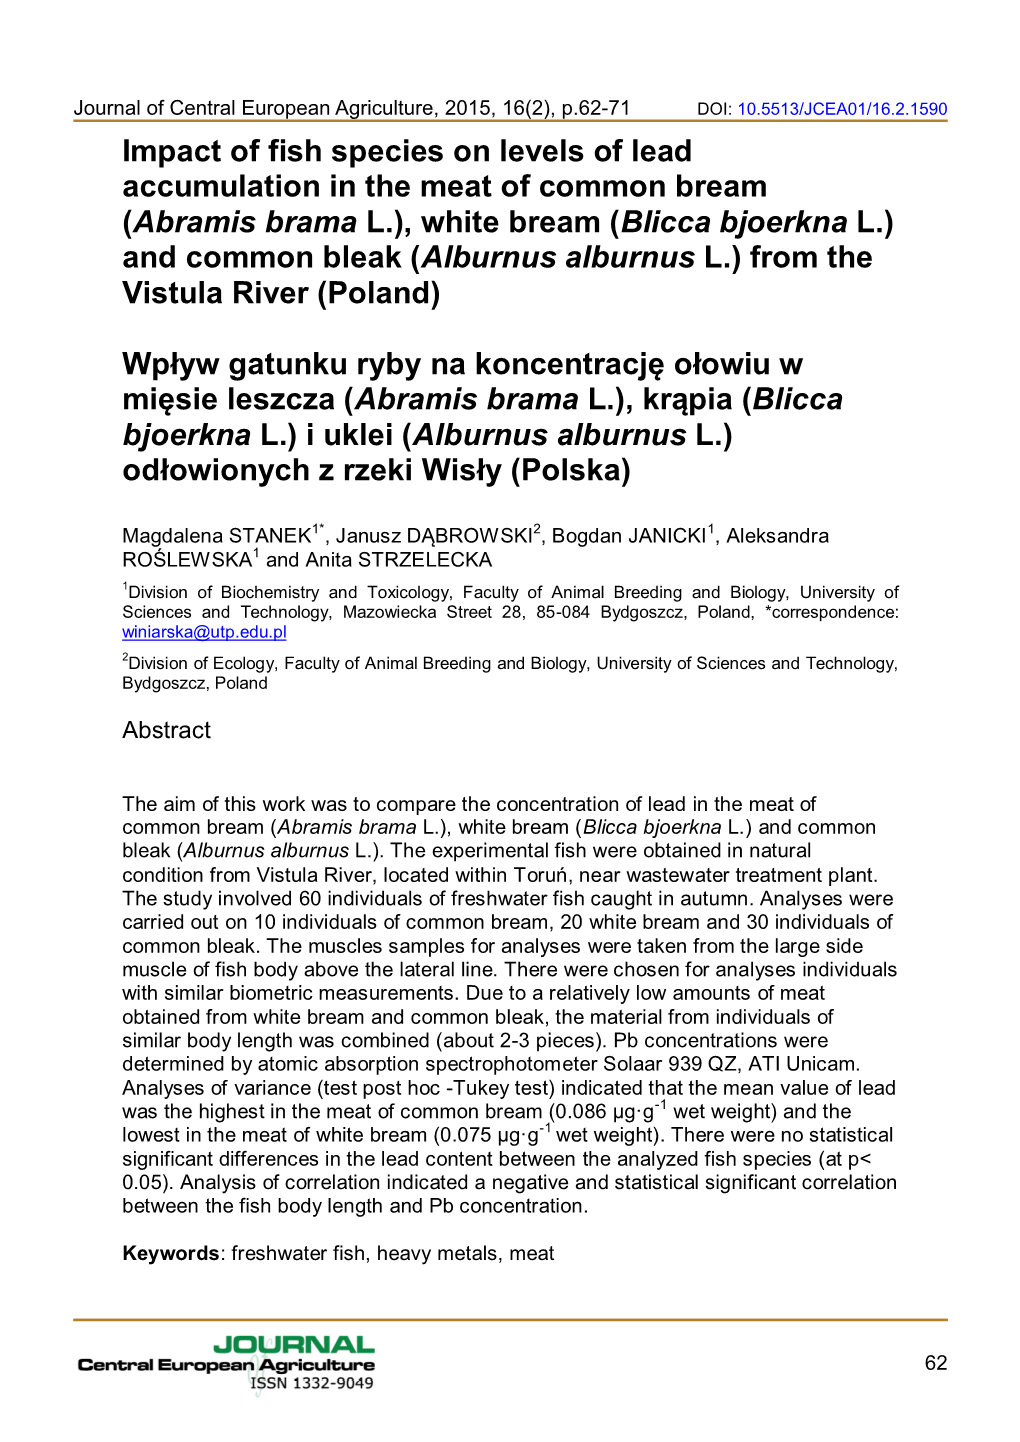 Impact of Fish Species on Levels of Lead Accumulation in the Meat of Common Bream (Abramis Brama L.), White Bream (Blicca Bjoerk